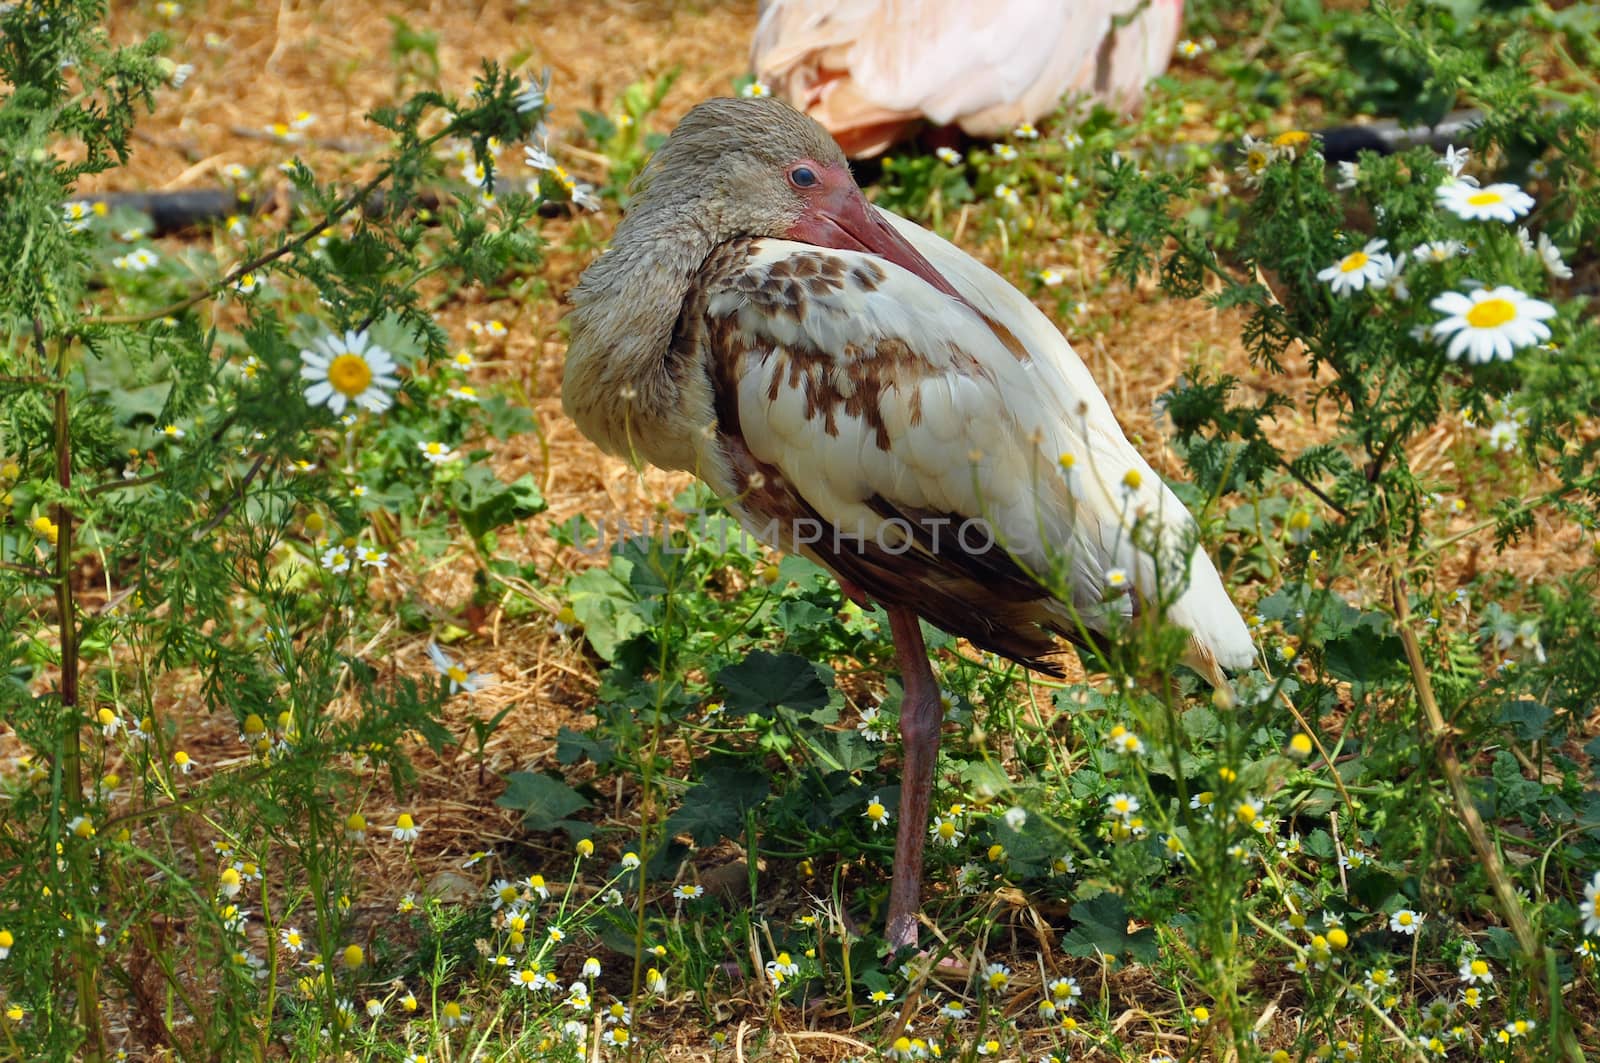 American white ibis juvenile bird resting with head tucked into back feathers.